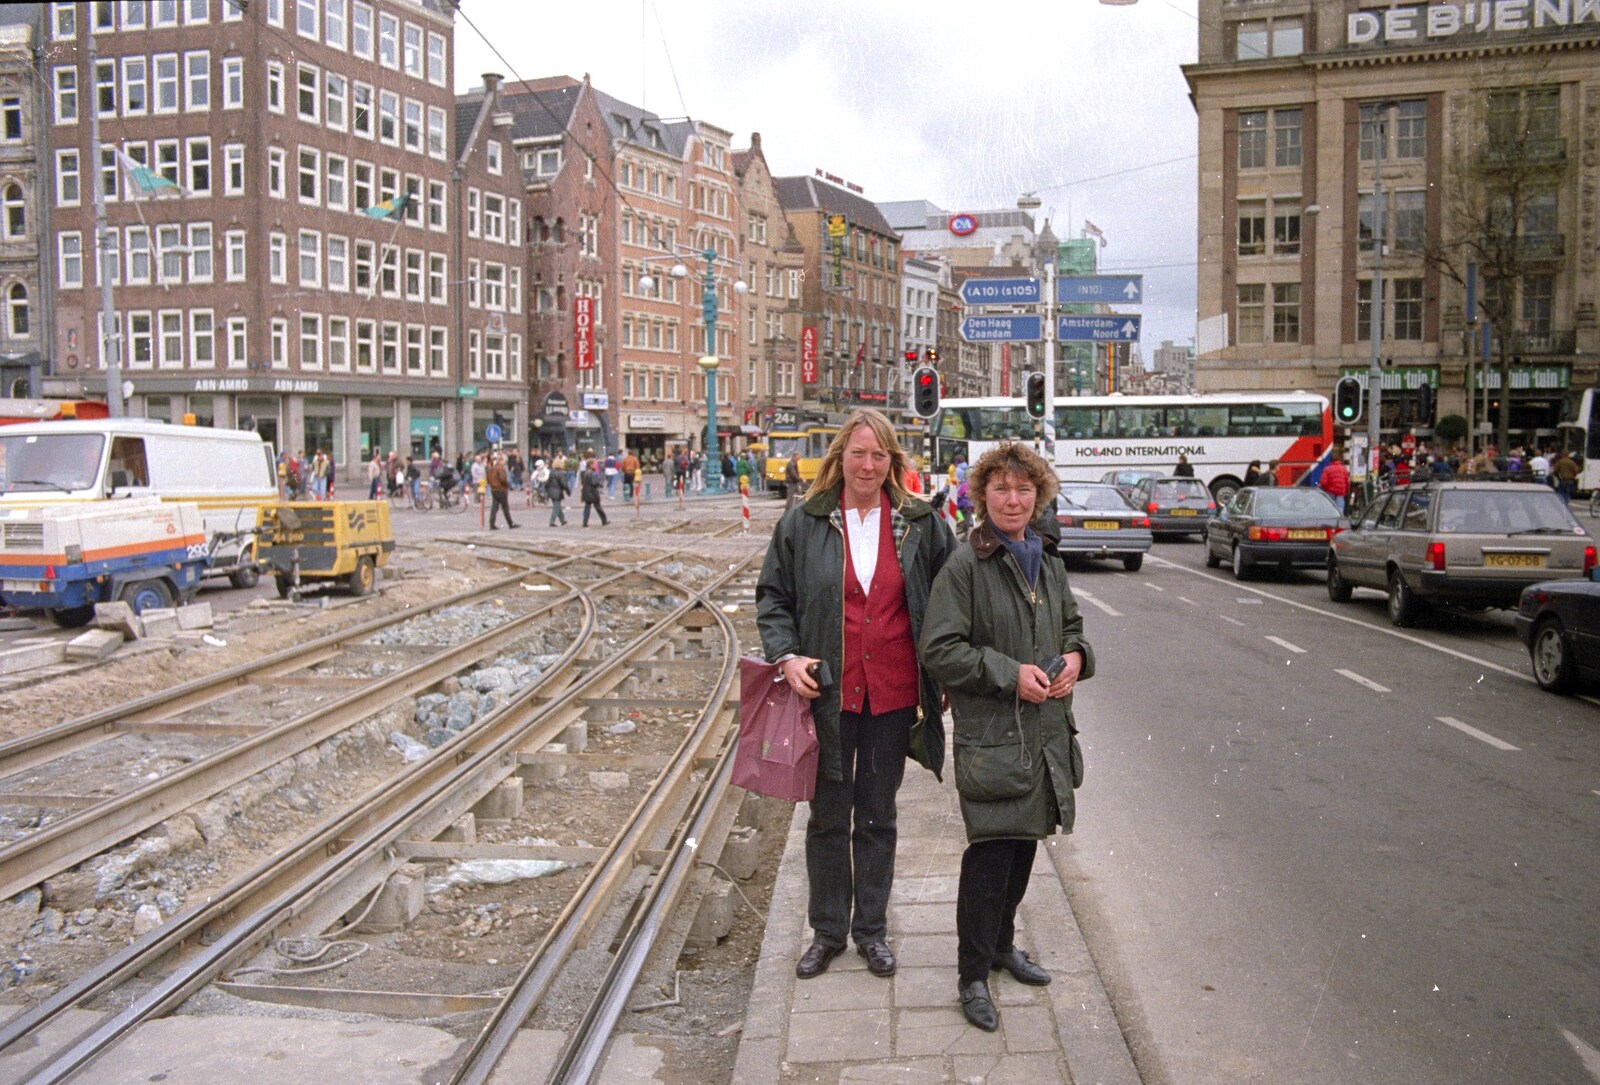 Out and About in Amsterdam, Hoorne, Vollendam and Edam, The Netherlands - 26th March 1992: Sue and Brenda stand next to some dug-up tram tracks